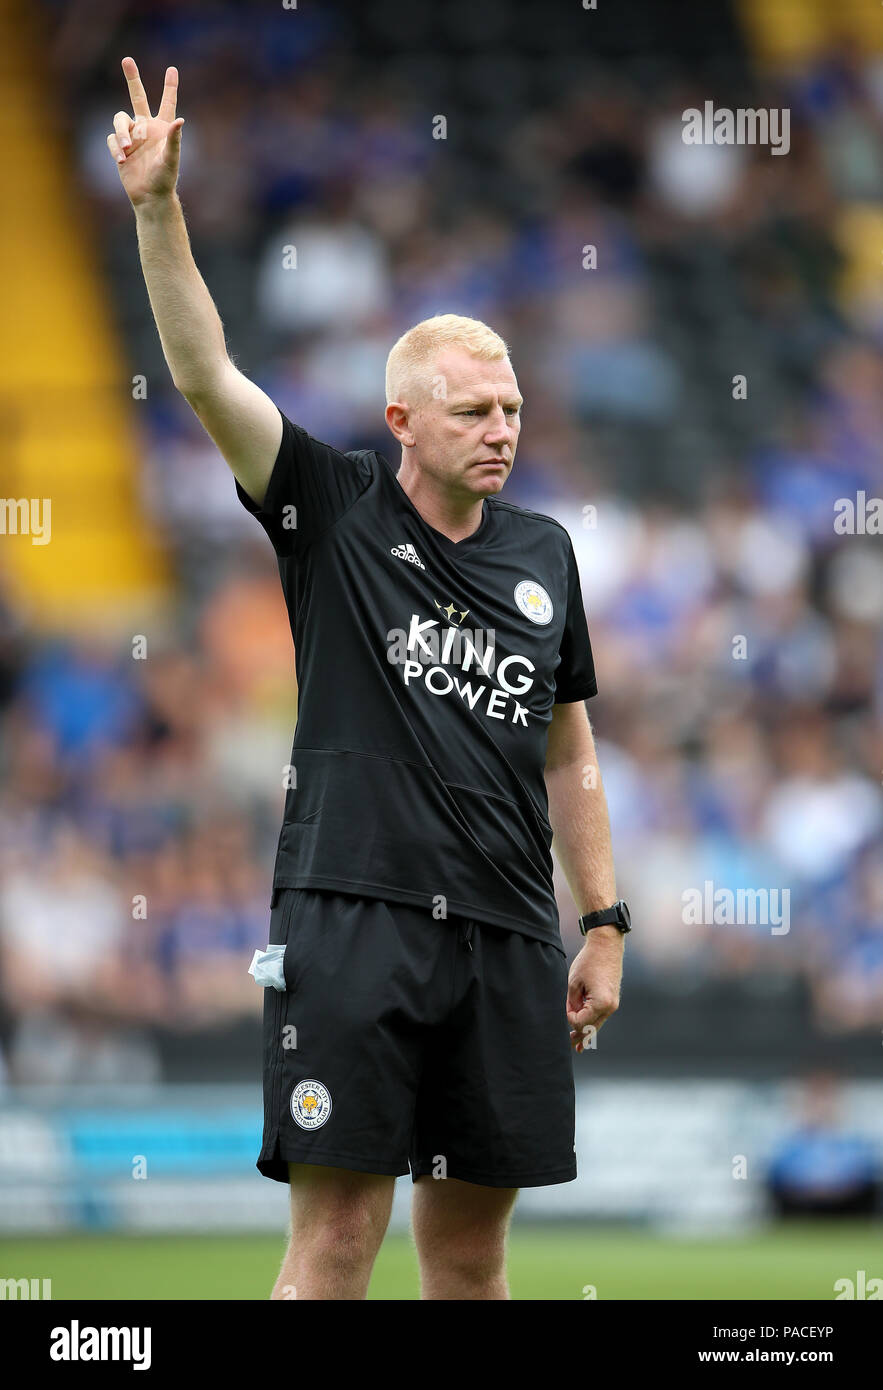 Leicester City assistant manager Adam Sadler during a pre season friendly match at Meadow Lane, Nottingham. PRESS ASSOCIATION Photo. Picture date: Saturday July 21, 2018. Photo credit should read: Nick Potts/PA Wire. No use with unauthorised audio, video, data, fixture lists, club/league logos or 'live' services. Online in-match use limited to 75 images, no video emulation. No use in betting, games or single club/league/player publications. Stock Photo